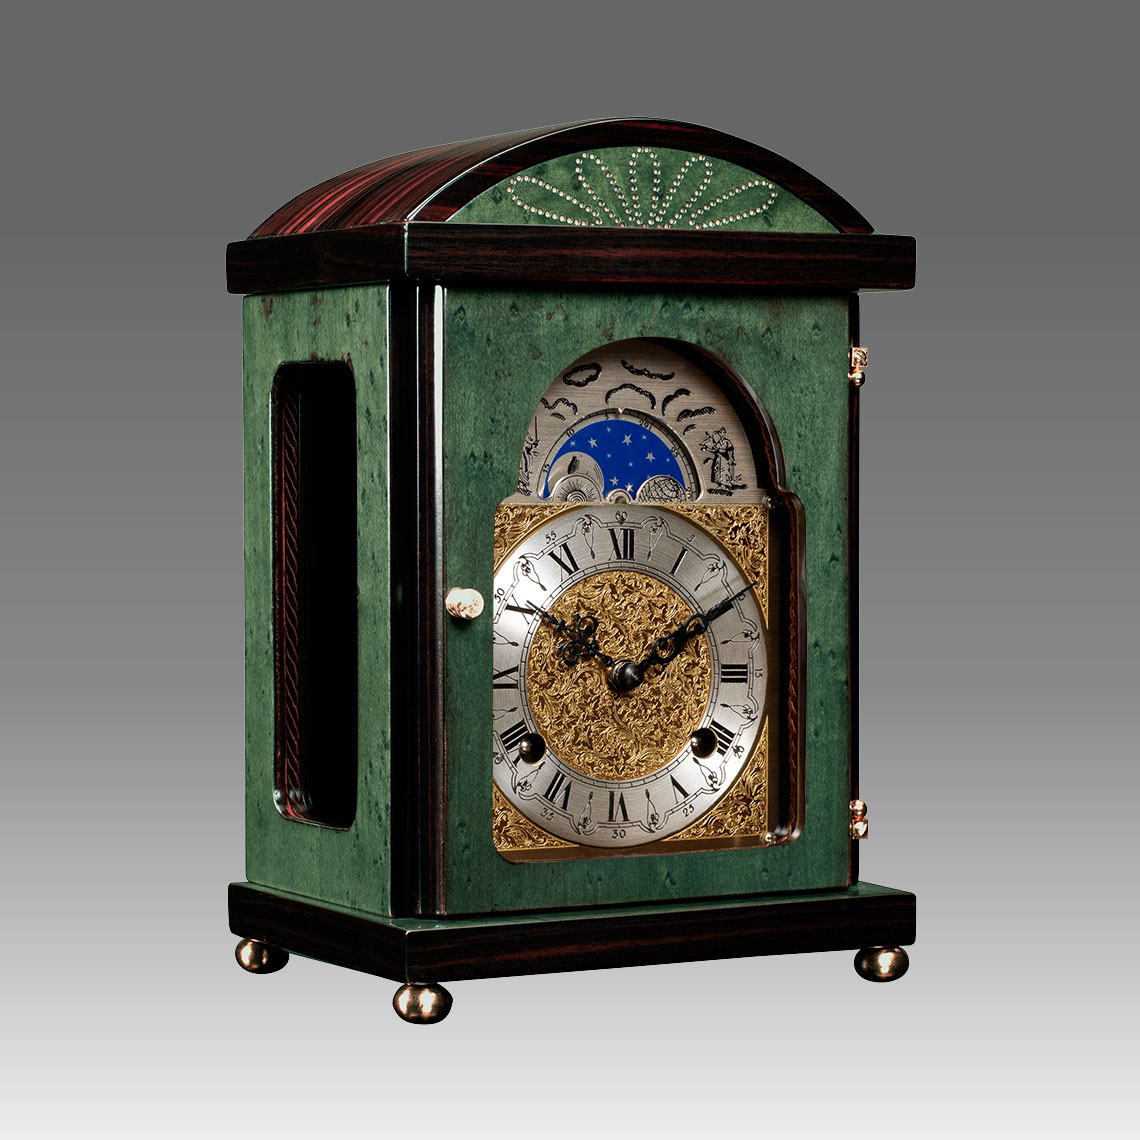 Mante Clock, Table Clock, Cimn Clock, Art.340/4 Erable green wood - Bim Bam melody on Bells, eatched decorated moon fase dial